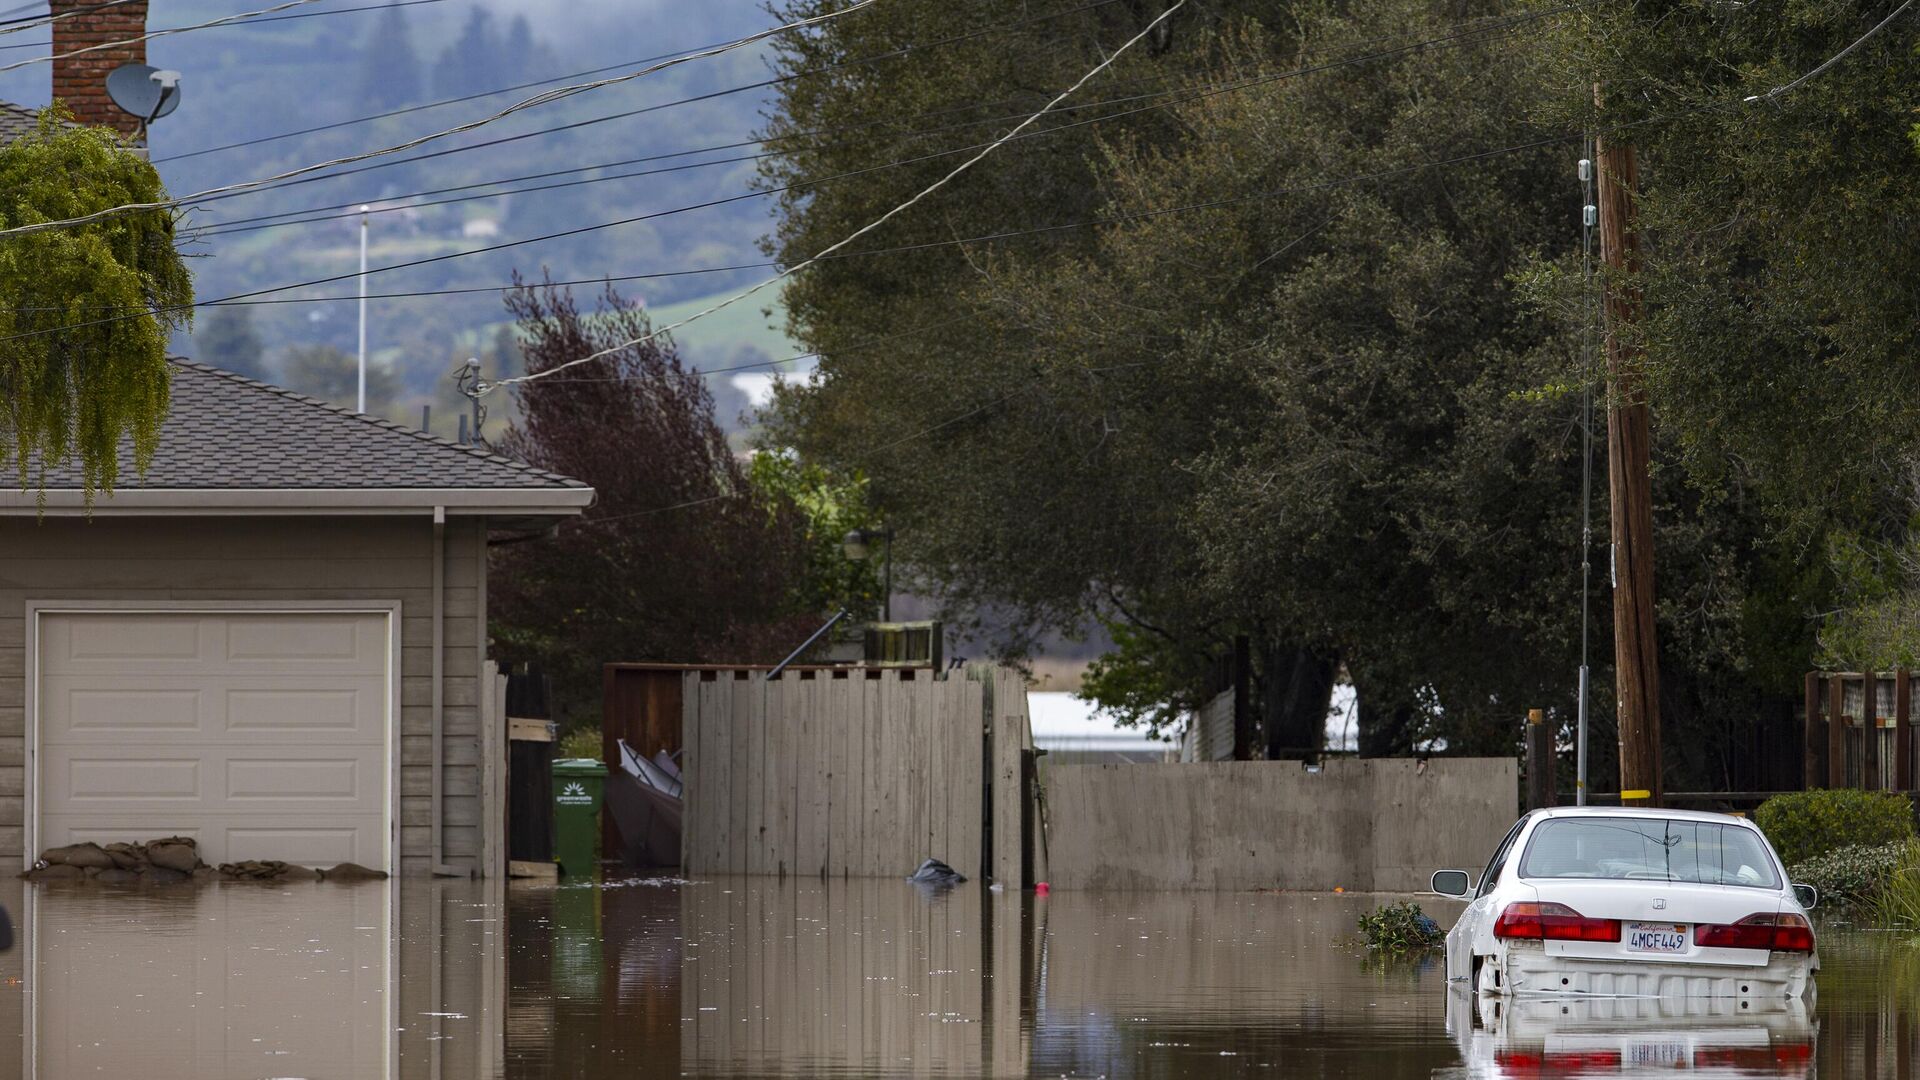 A car is surrounded by floodwaters in Watsonville, Calif., Friday, March 10, 2023. More than 9,000 California residents were under evacuation orders Friday as a new atmospheric river brought heavy rain, thunderstorms and strong winds, swelling rivers and creeks and flooding several major highways during the morning commute. - Sputnik International, 1920, 23.03.2023